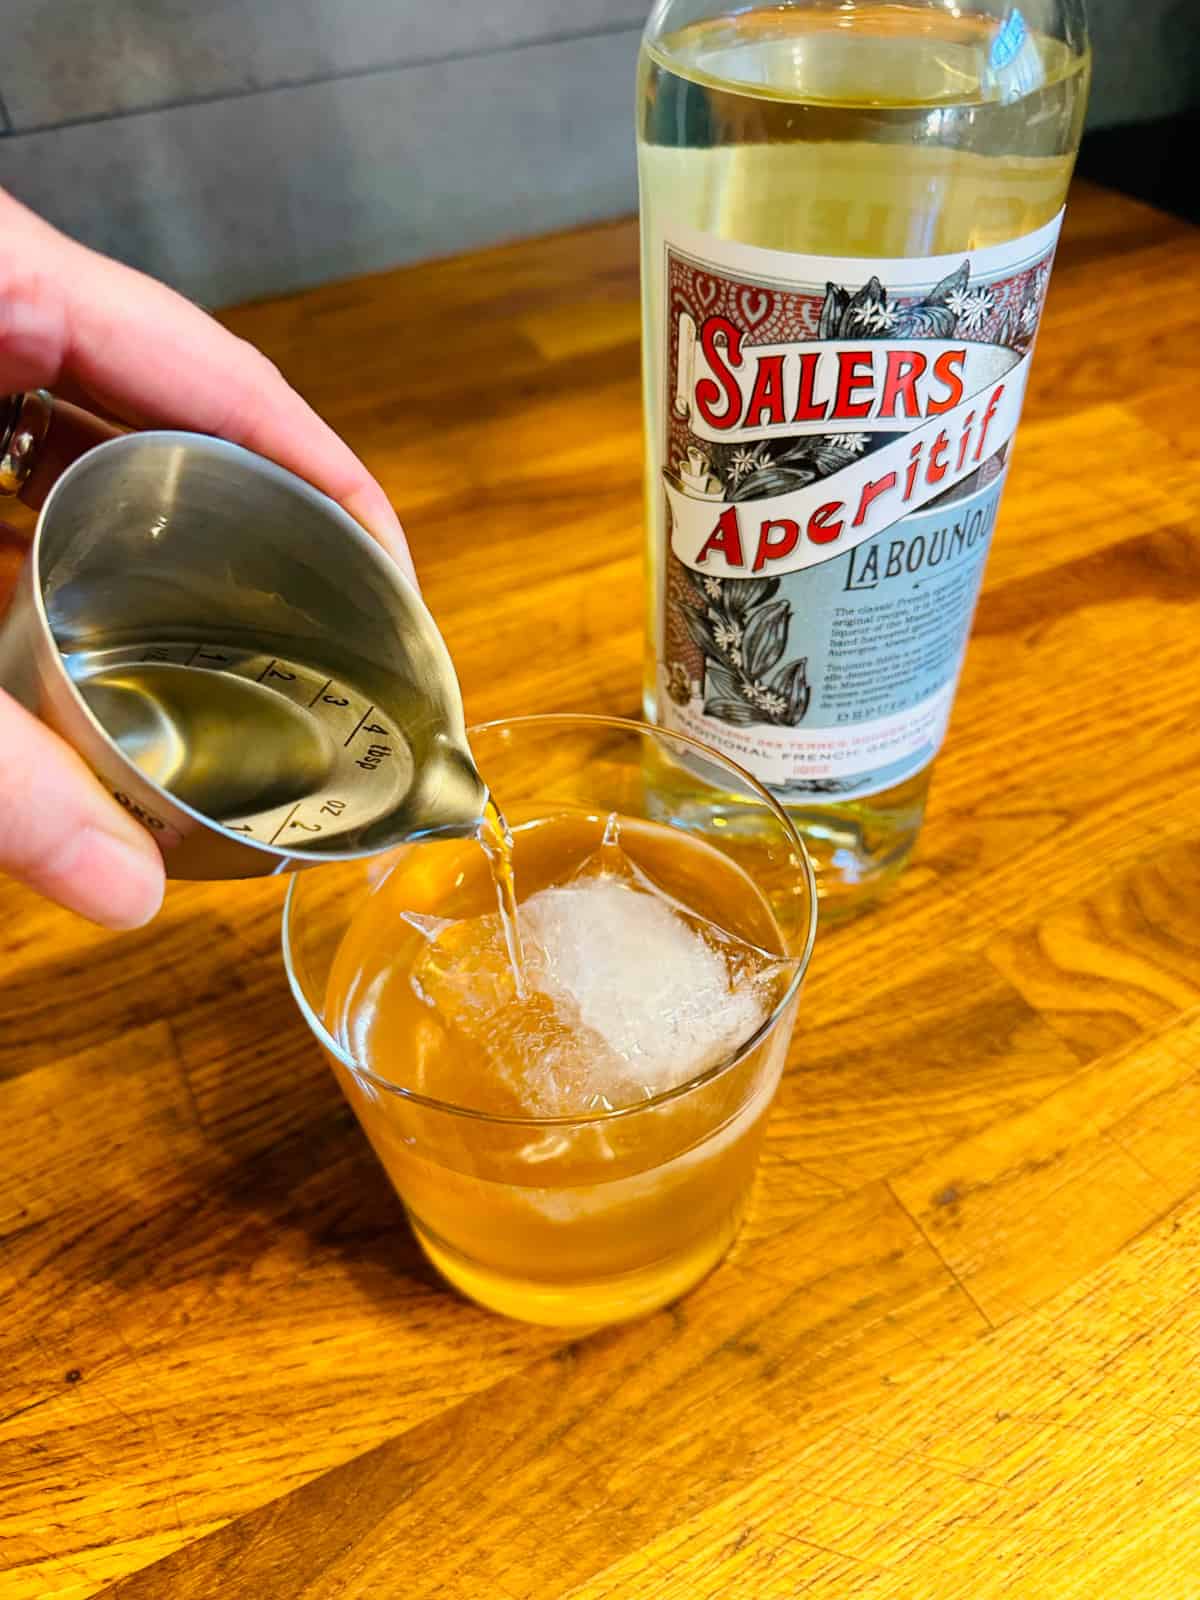 Pale golden liquid being poured from a steel measuring jigger into a rocks glass with a large ice cube next to a bottle of sales.